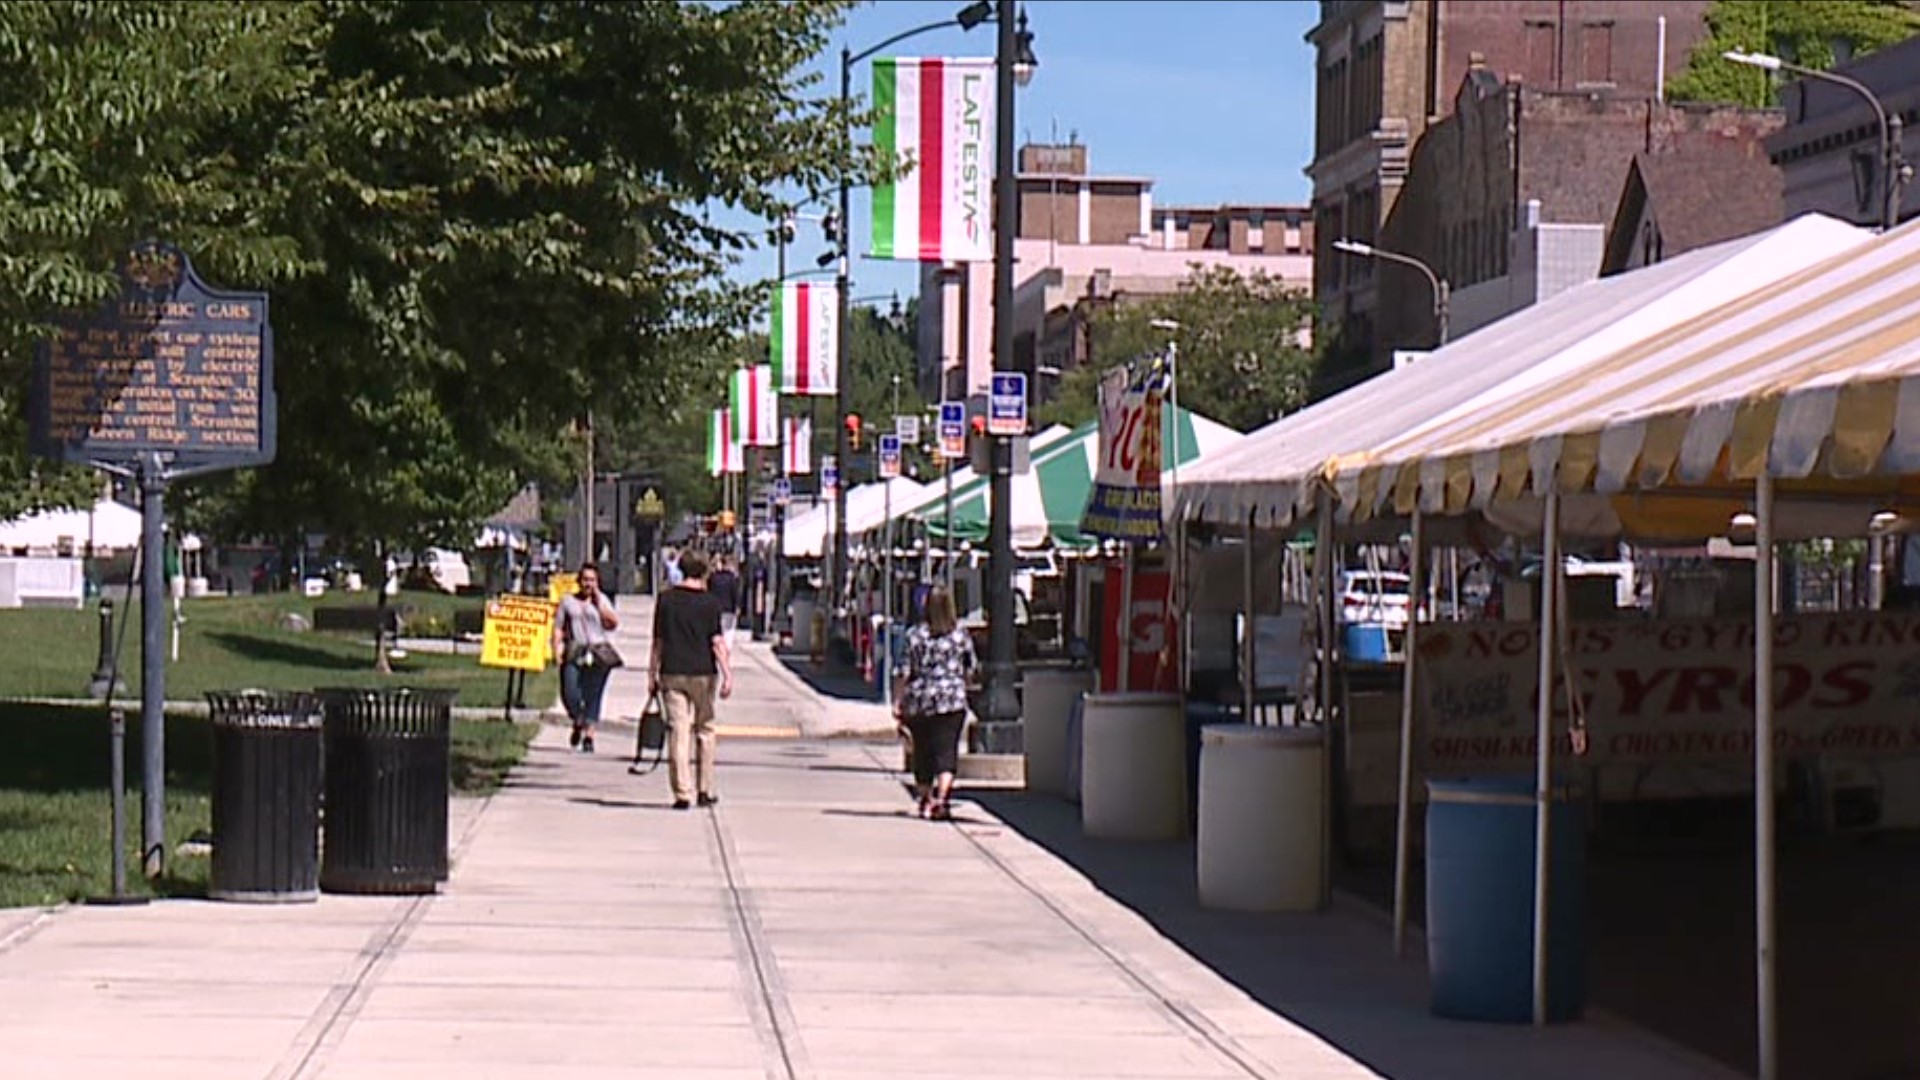 The festival on Courthouse Square runs through Monday evening.